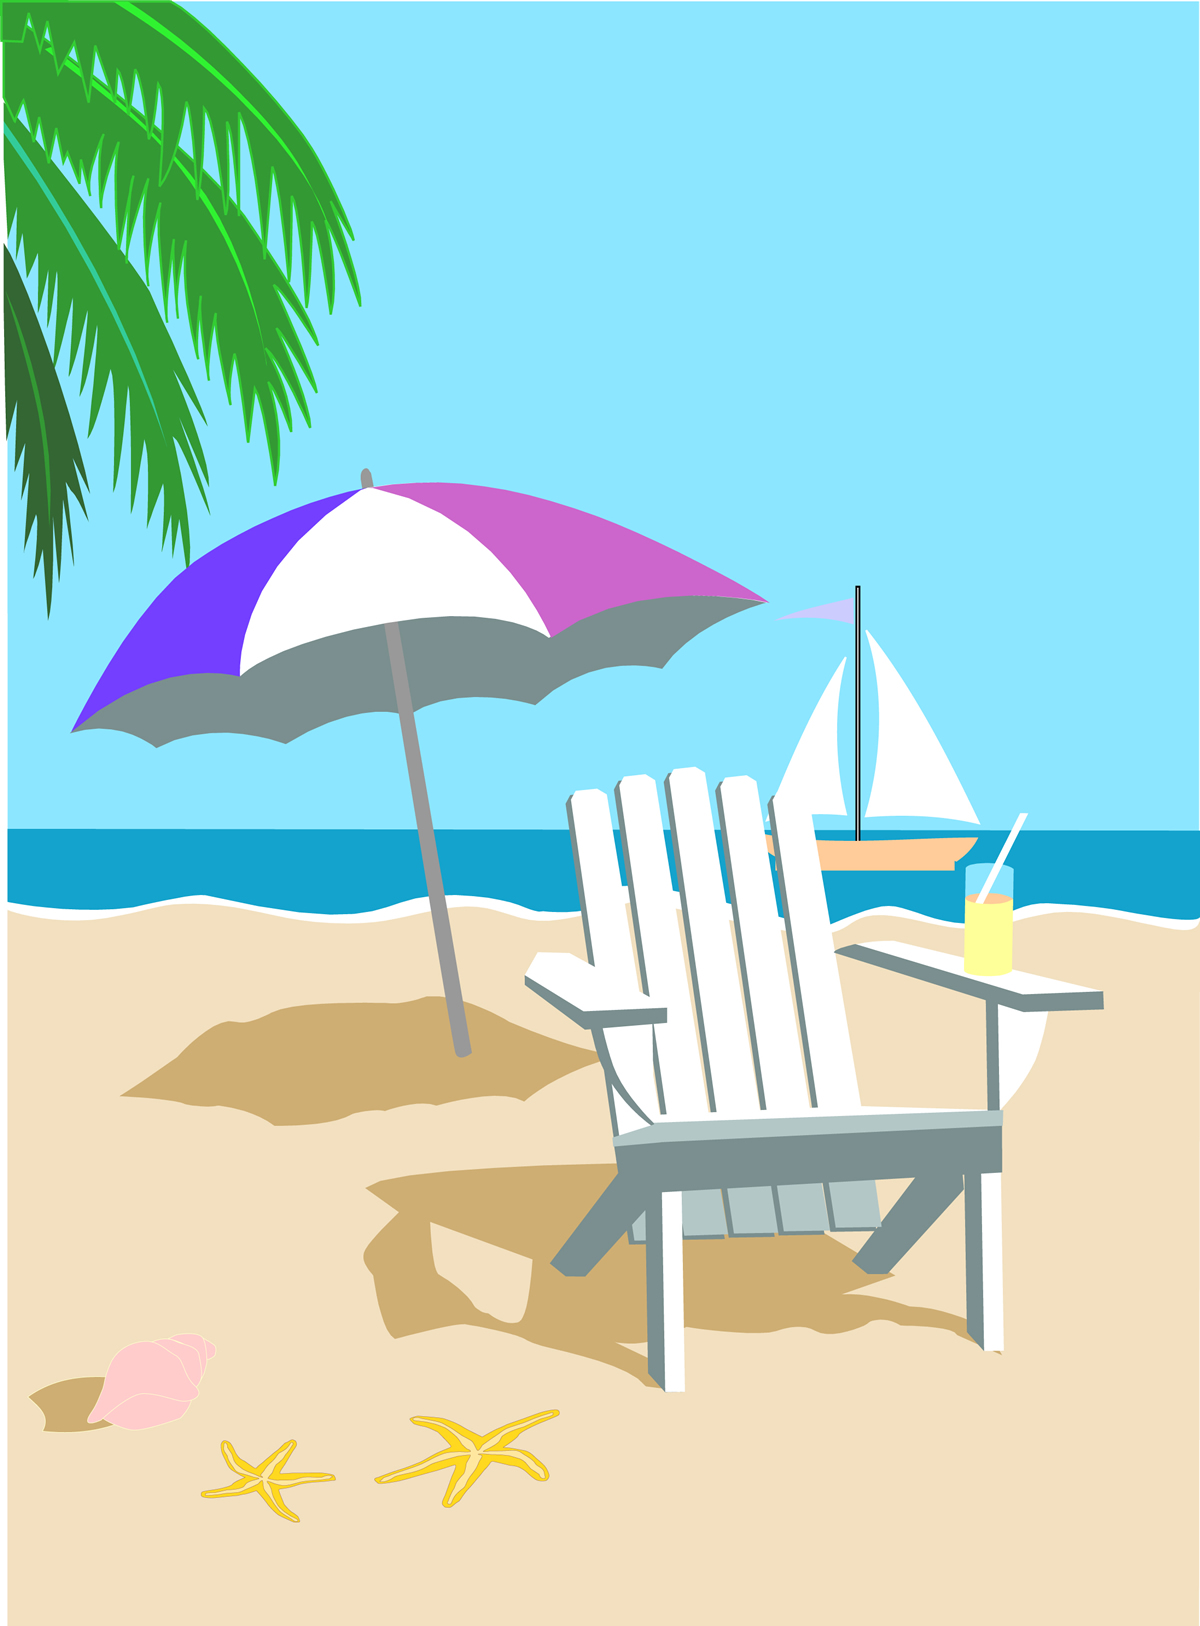 free vacation clipart pictures